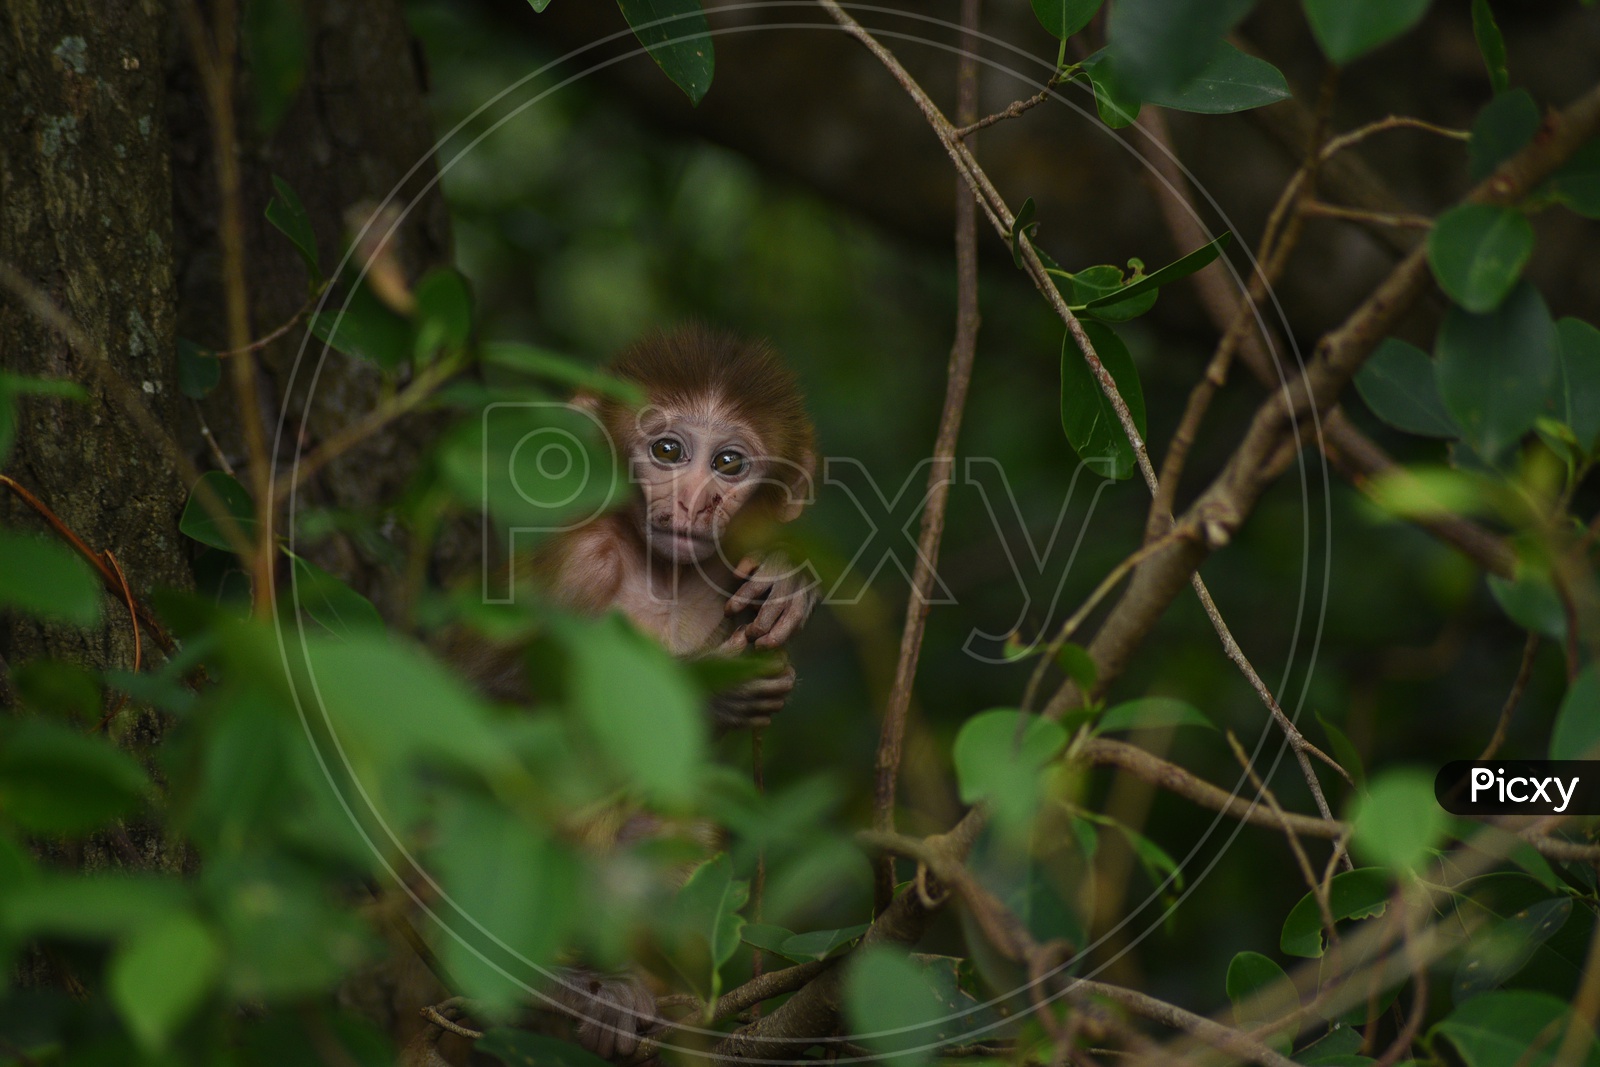 A baby monkey on a tree branch